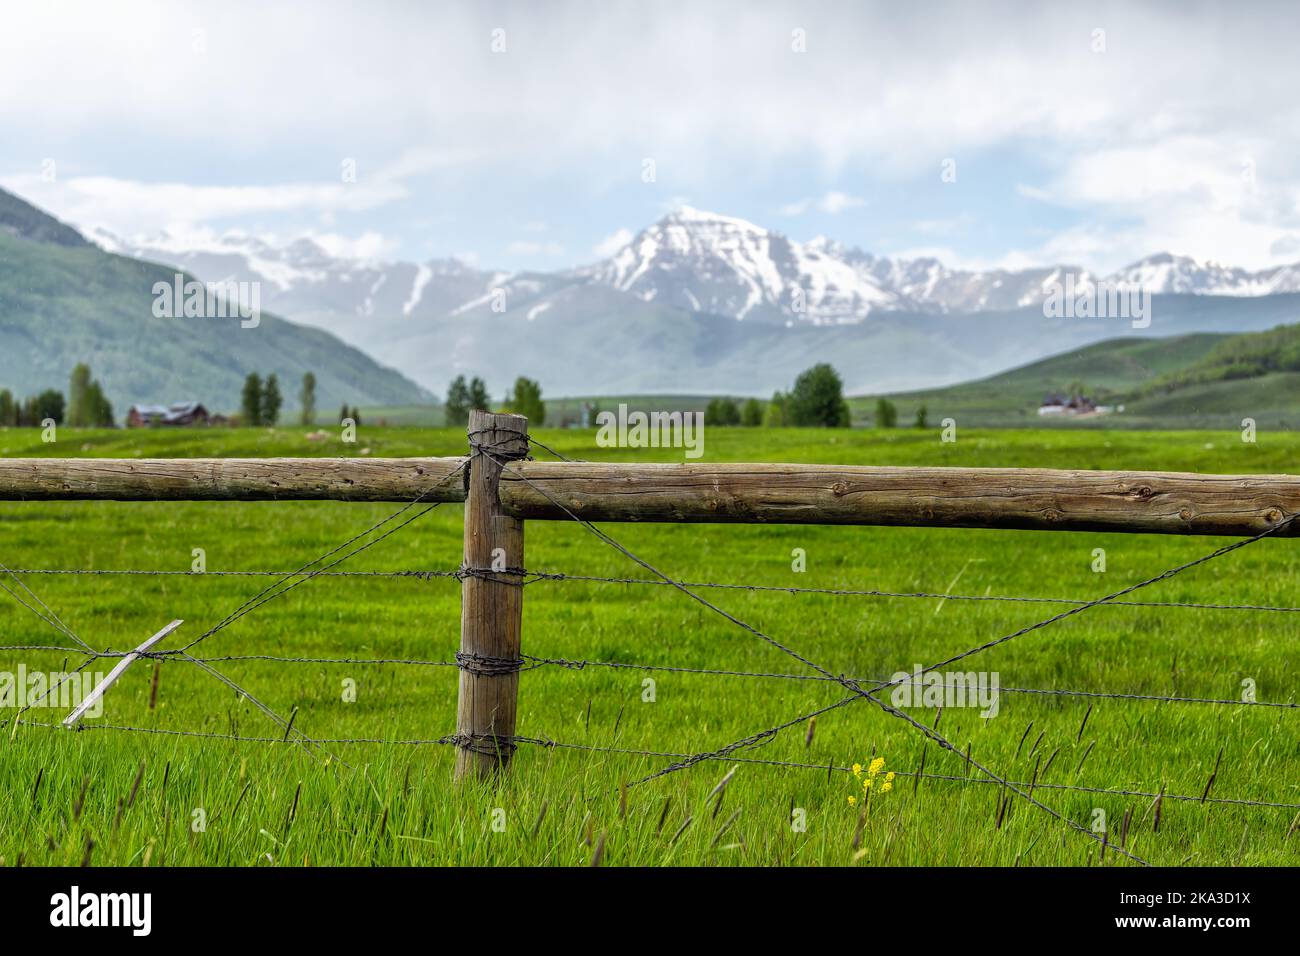 Crested Butte, Colorado farm countryside view of wooden wire fence by farmland field and yellow flowers growing in summer on cloudy day with green gra Stock Photo